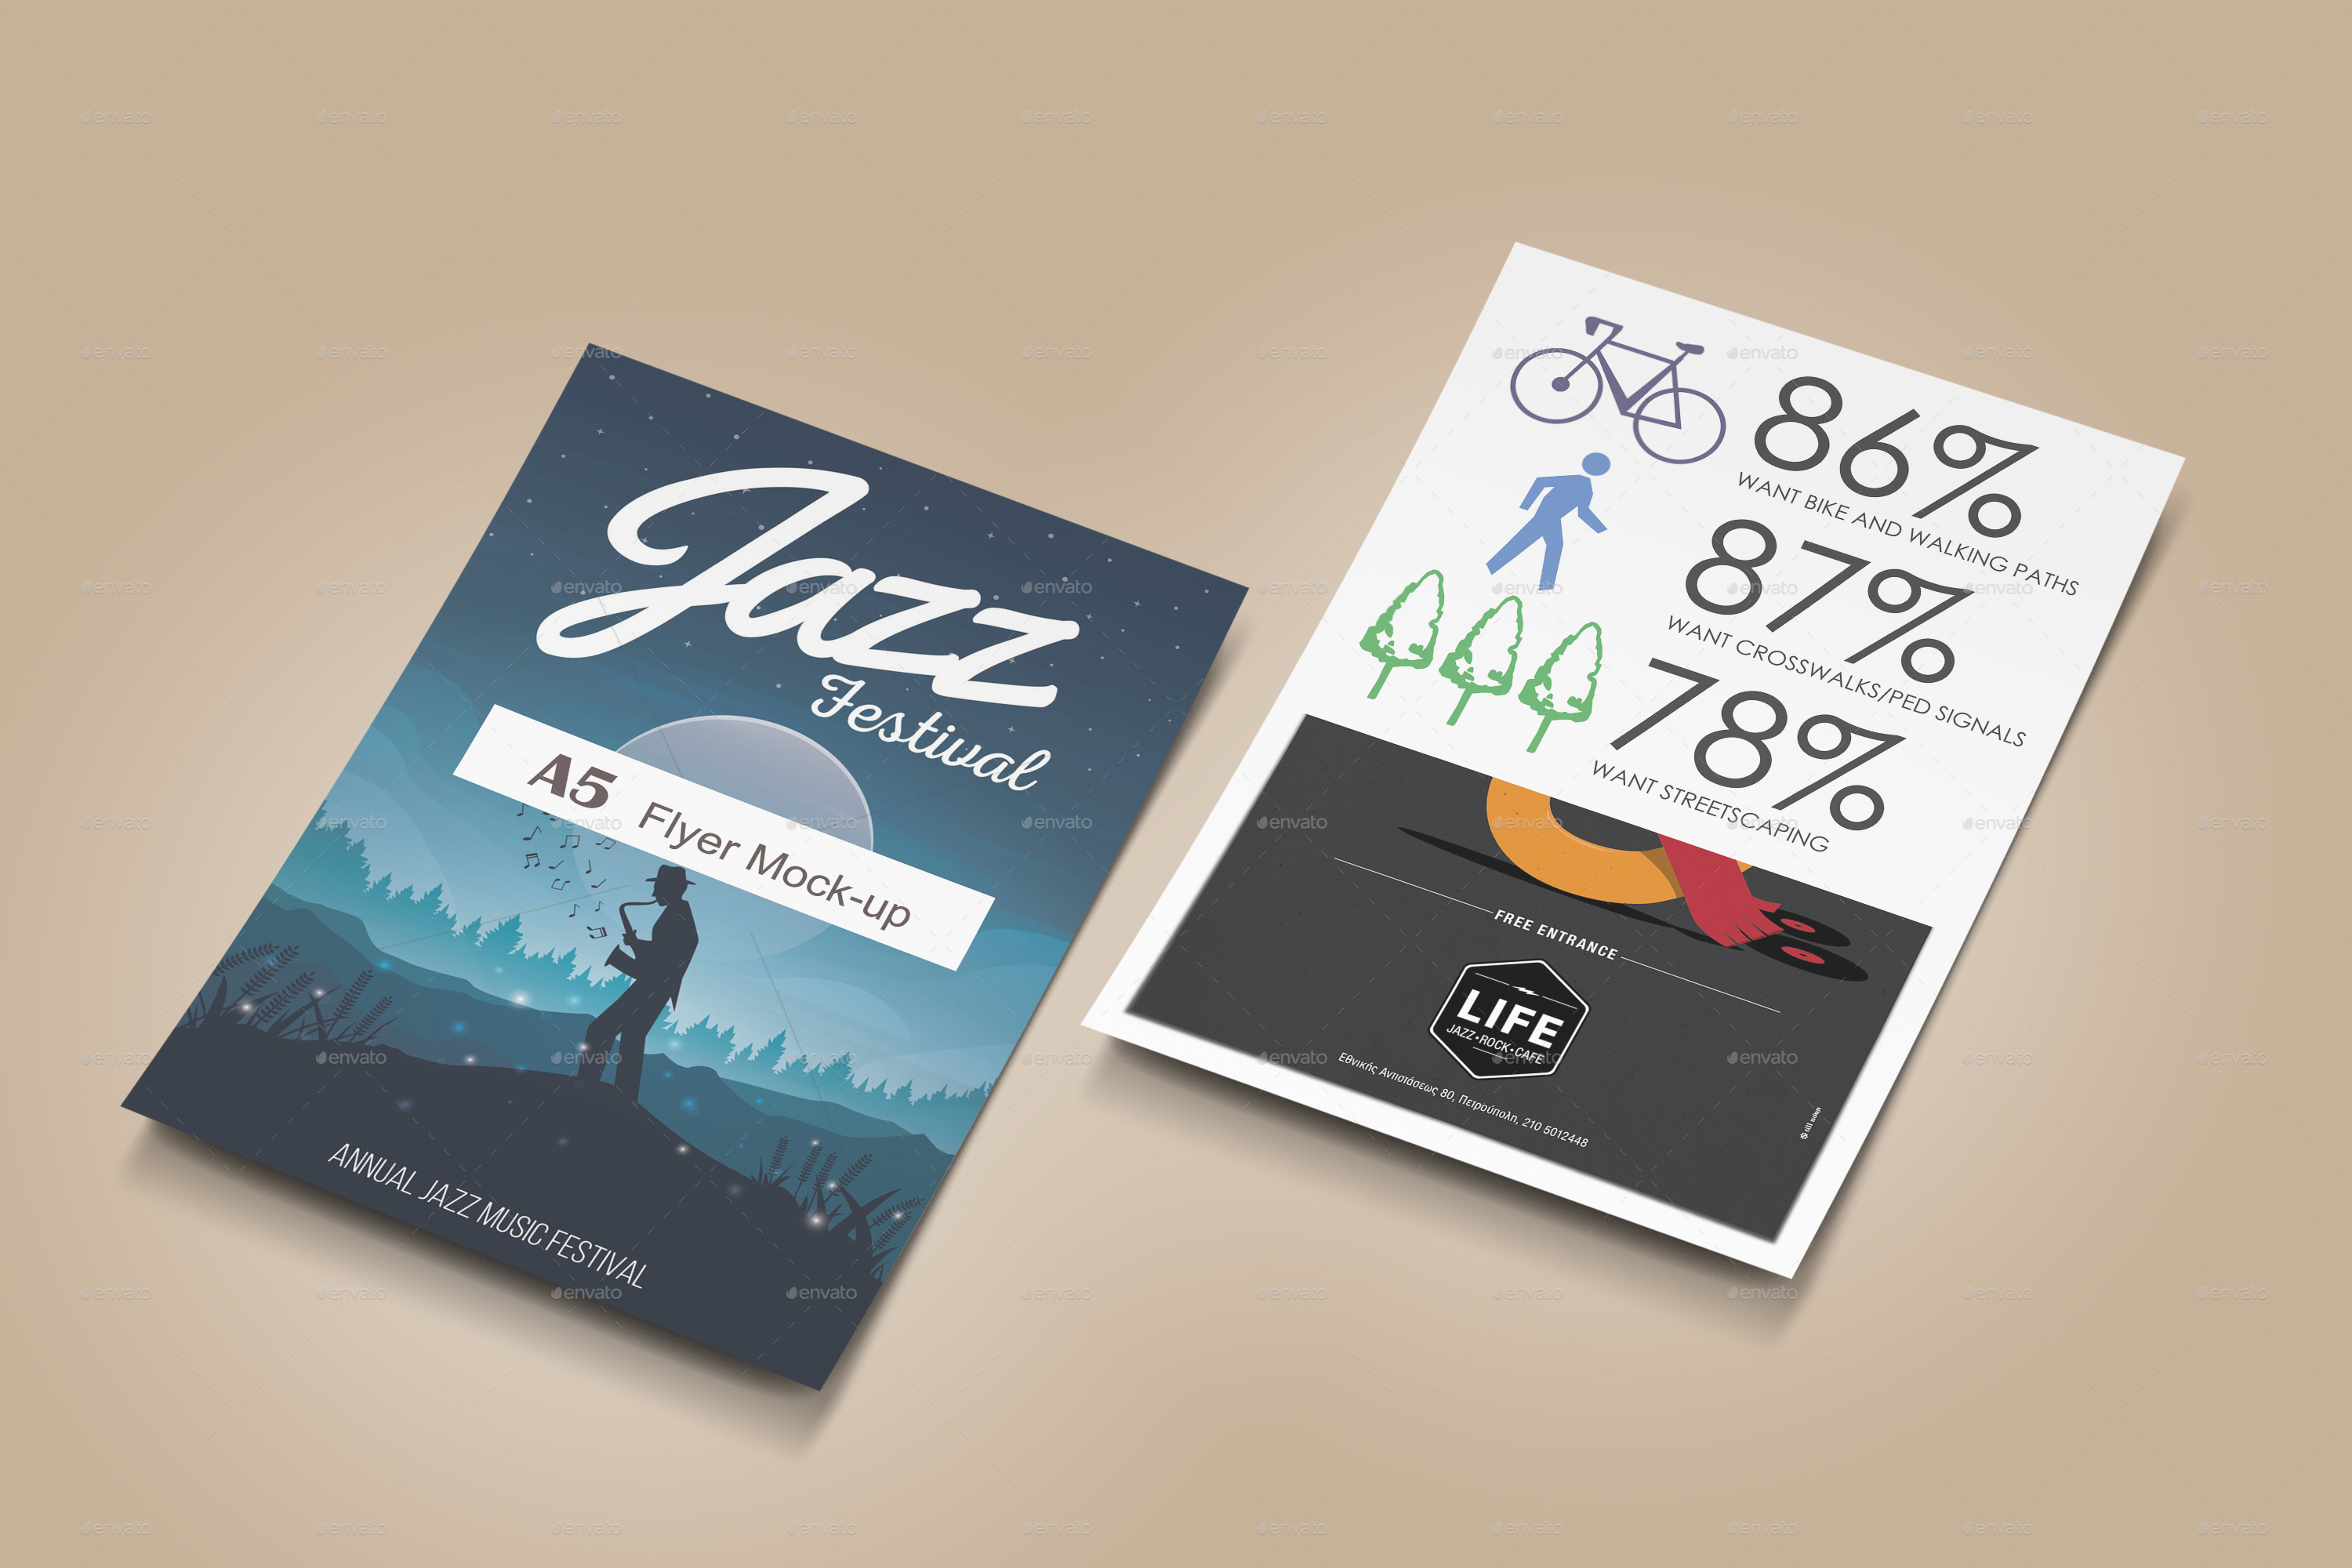 Download A5 Flyer / Poster Mock-Up by GraphicMonday | GraphicRiver